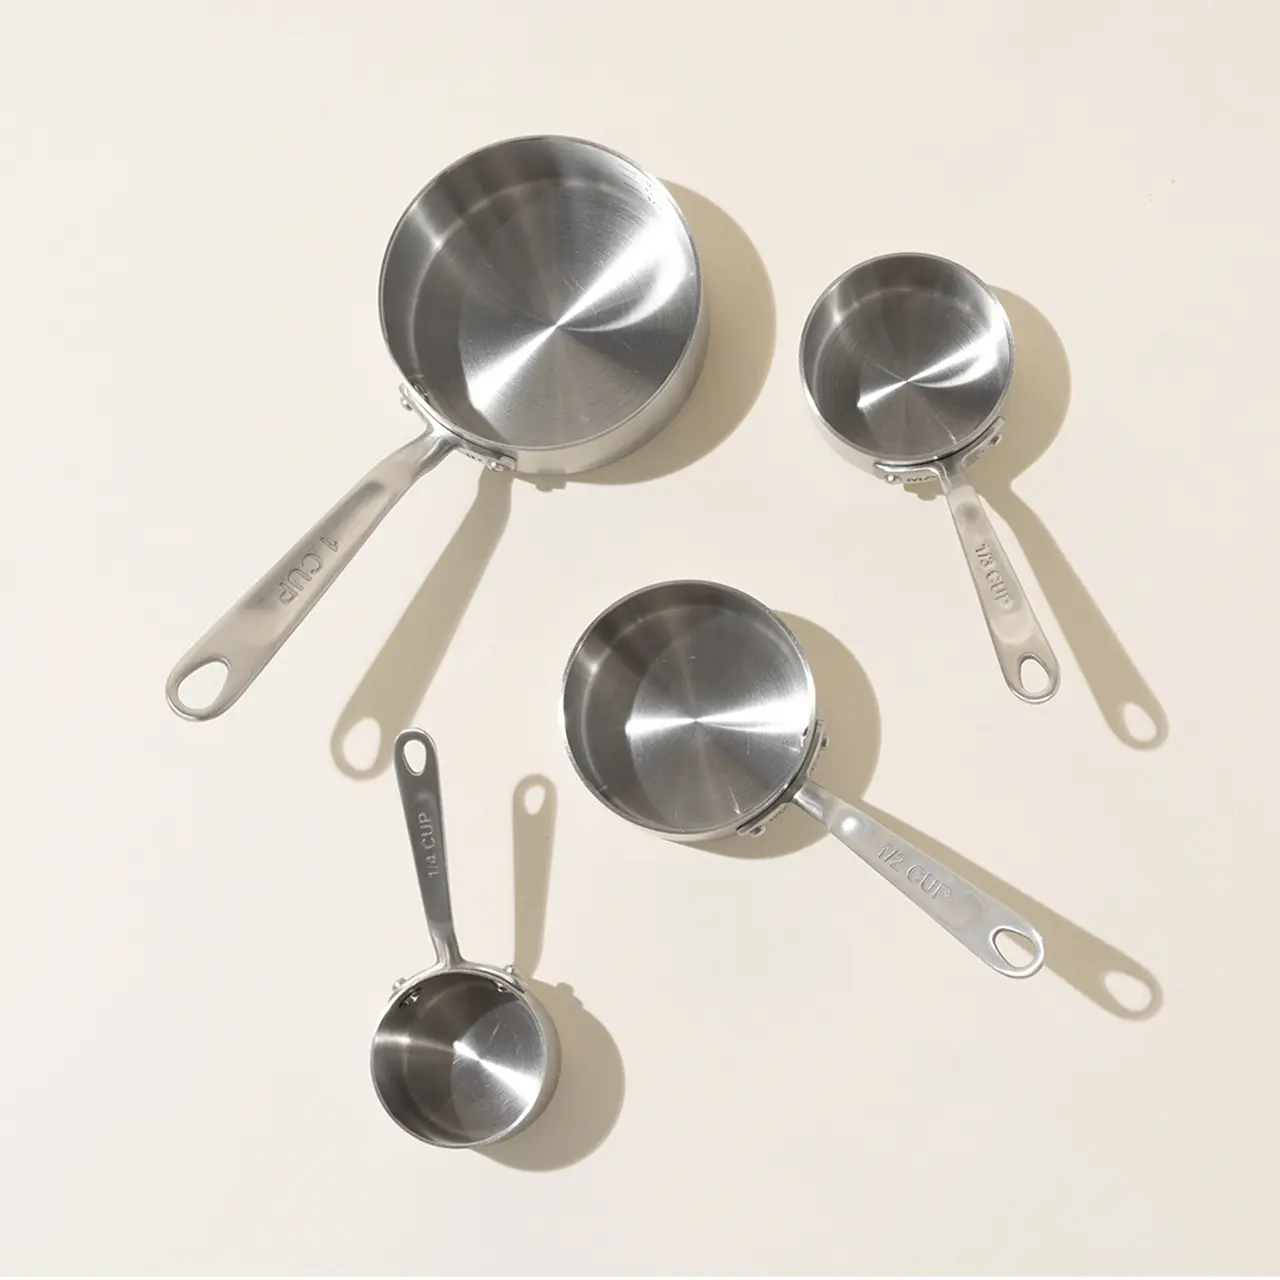 A set of four stainless steel measuring cups with different capacities are arranged on a light surface.